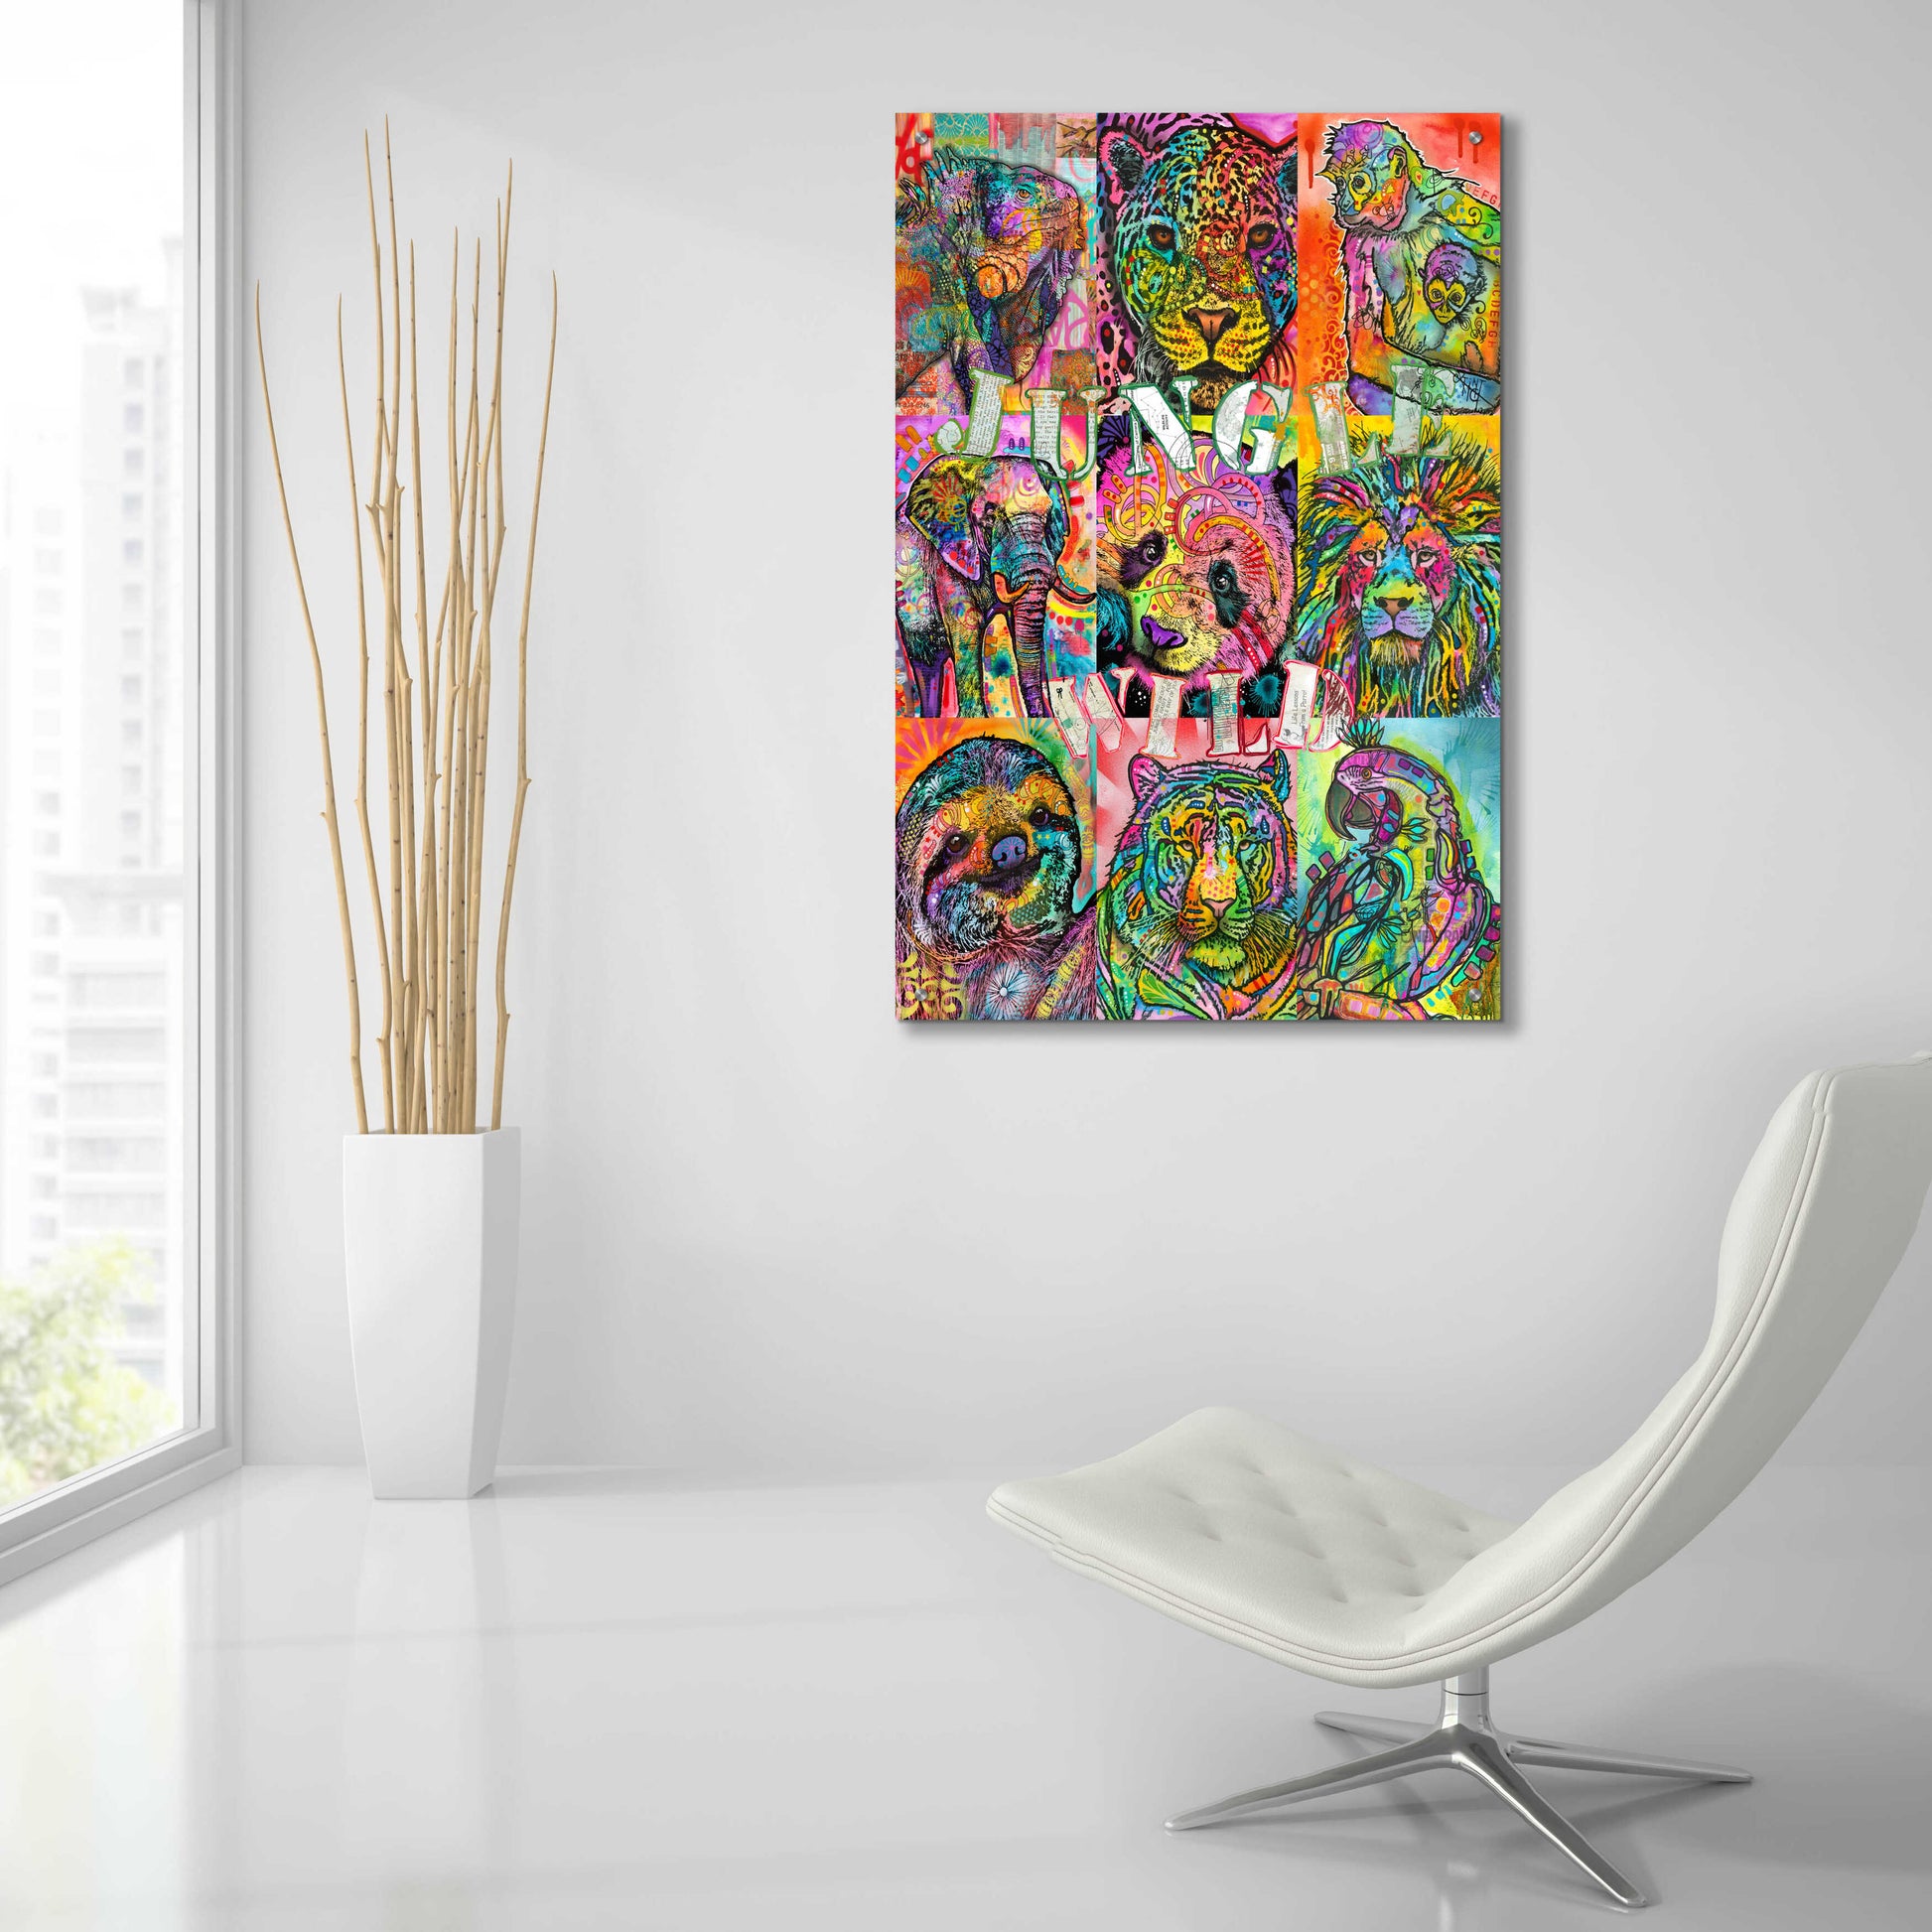 Epic Art 'Nine Up of Jungle Wild' by Dean Russo, Acrylic Glass Wall Art,24x36